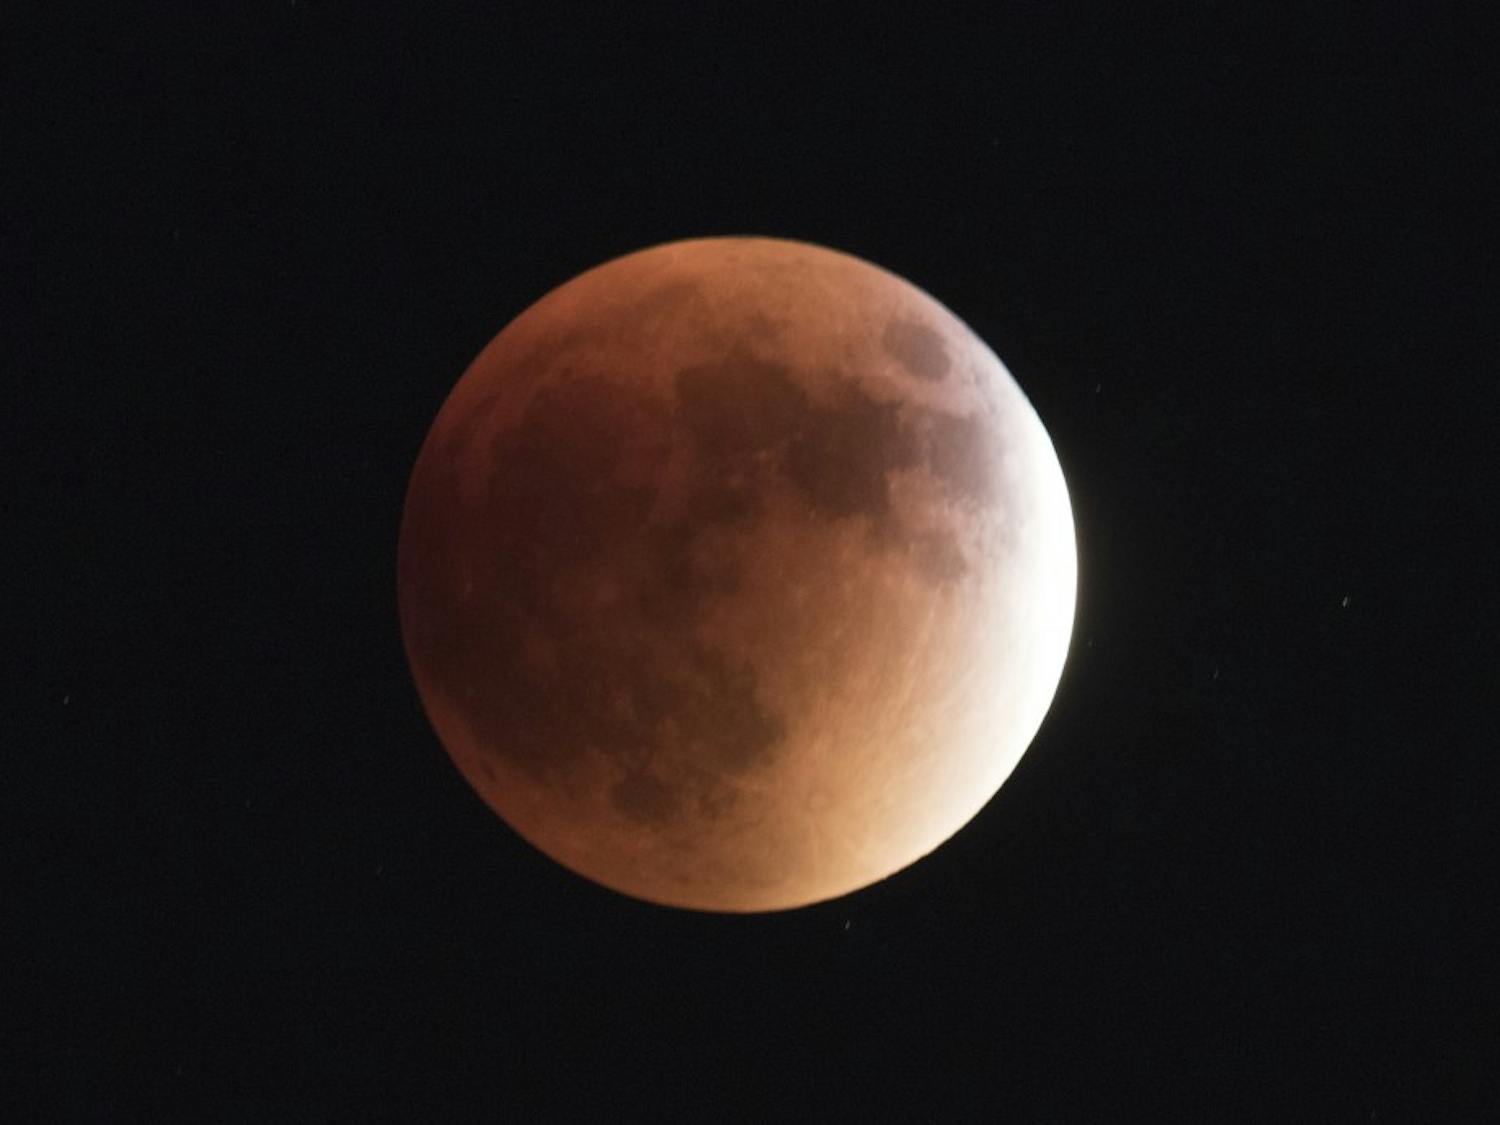 Photos: 'Super blood moon' rises over Valley